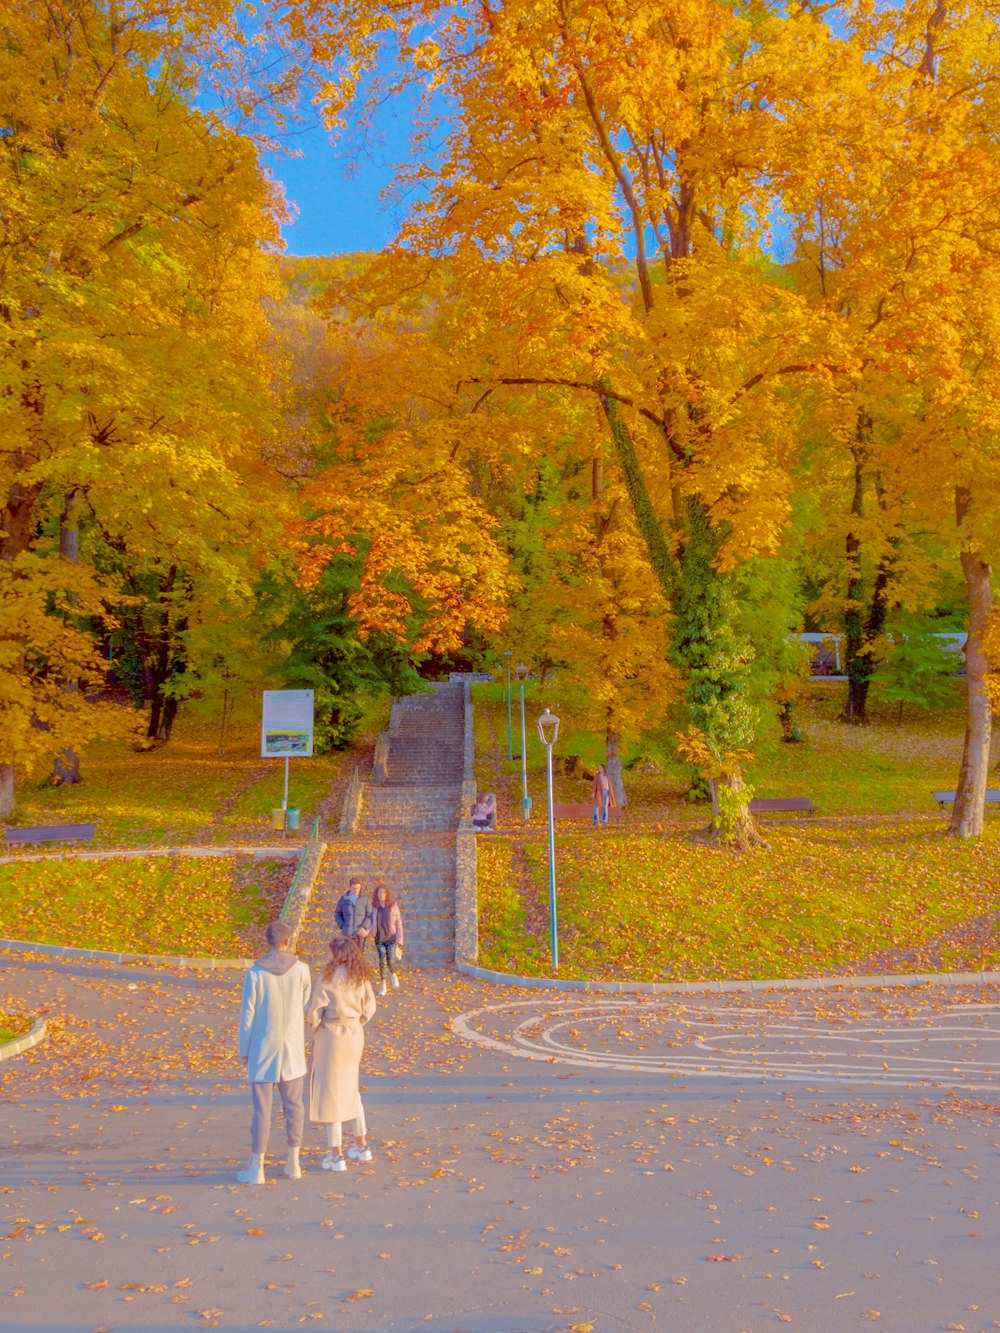 a group of people walking down a road in the fall